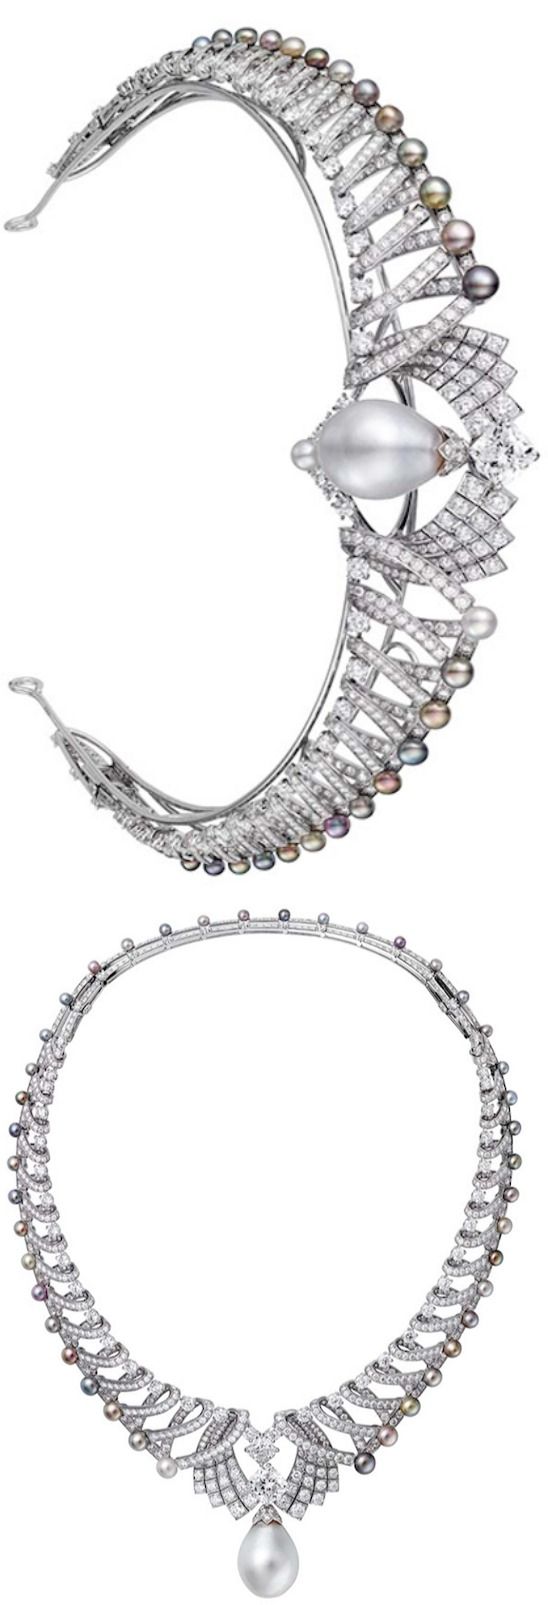 Cartier diamond tiara, necklace, decorated with pearls. In the center - a comple...